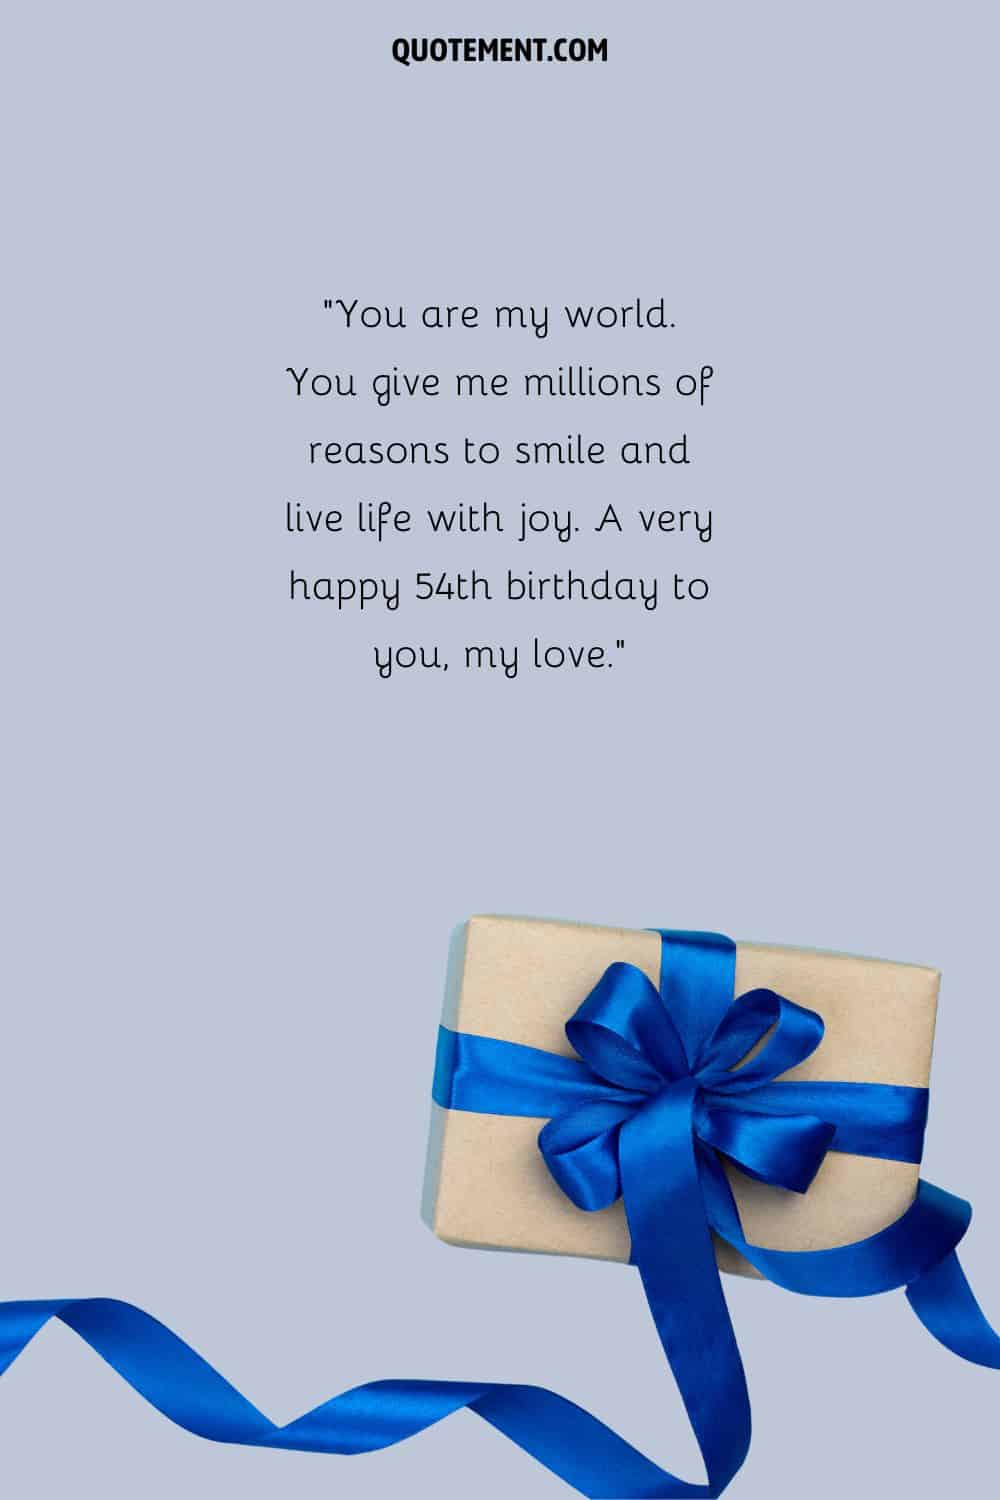 Lovely birthday message for a husband who turns 54 and a gift with a blue ribbon under it
